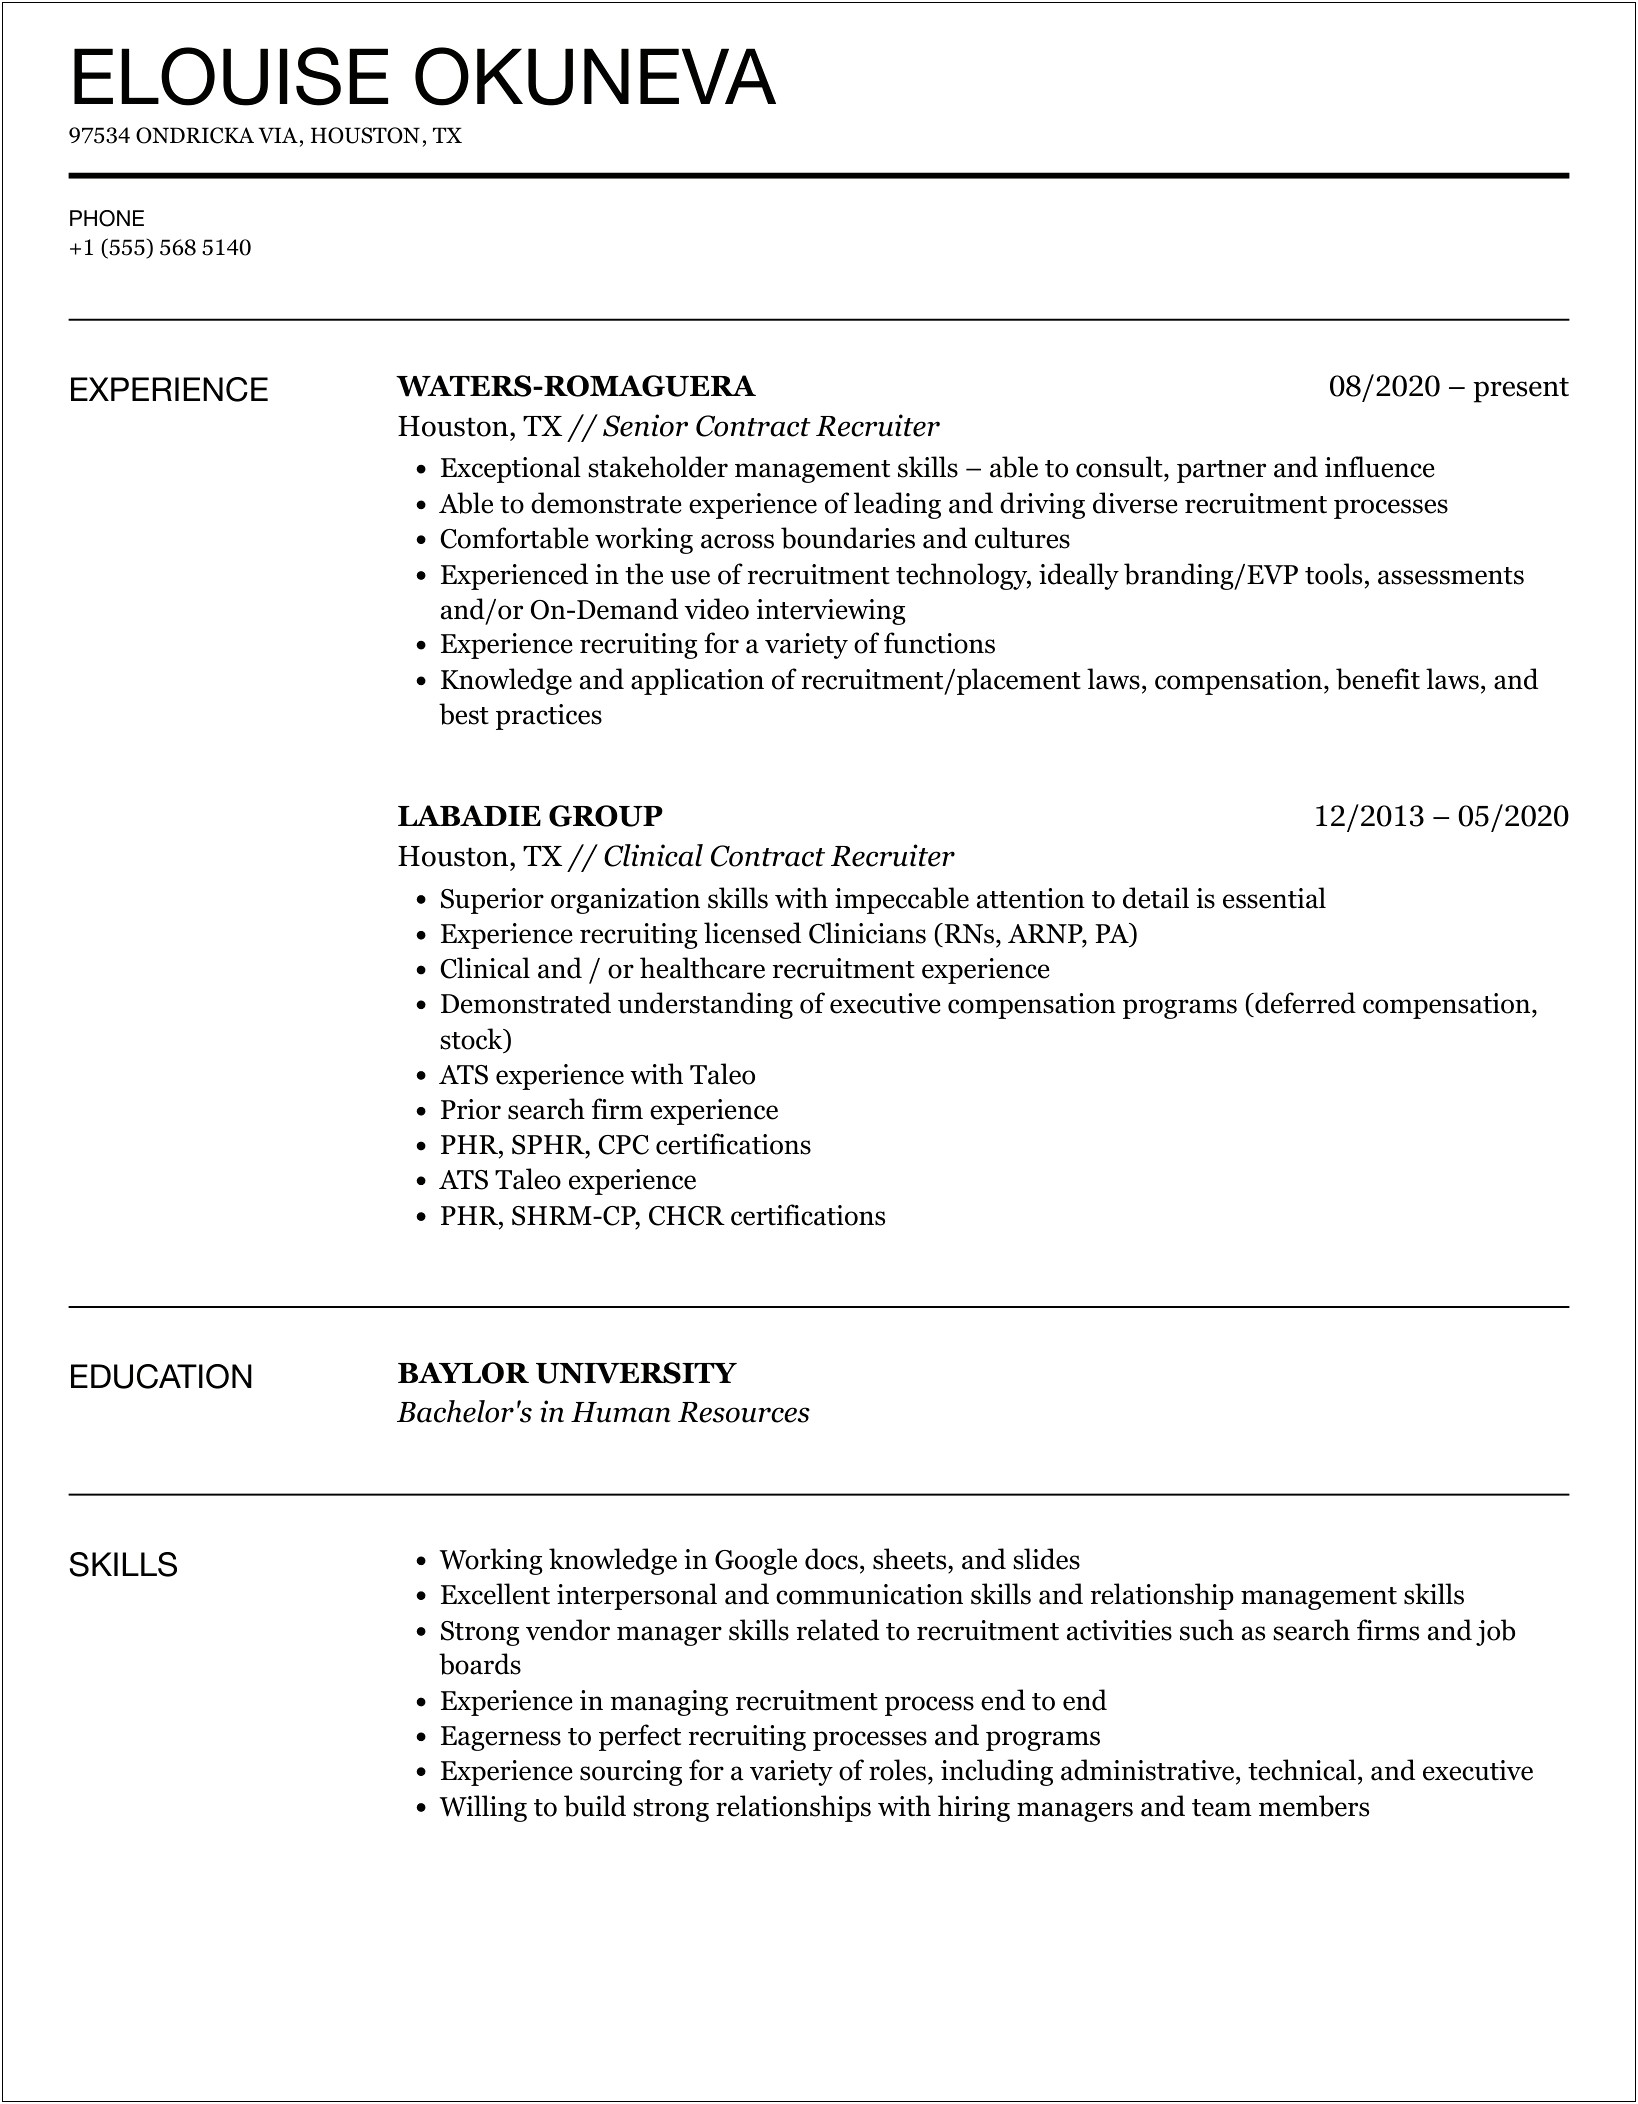 Recuriting Firm Or Work Firm On Resume